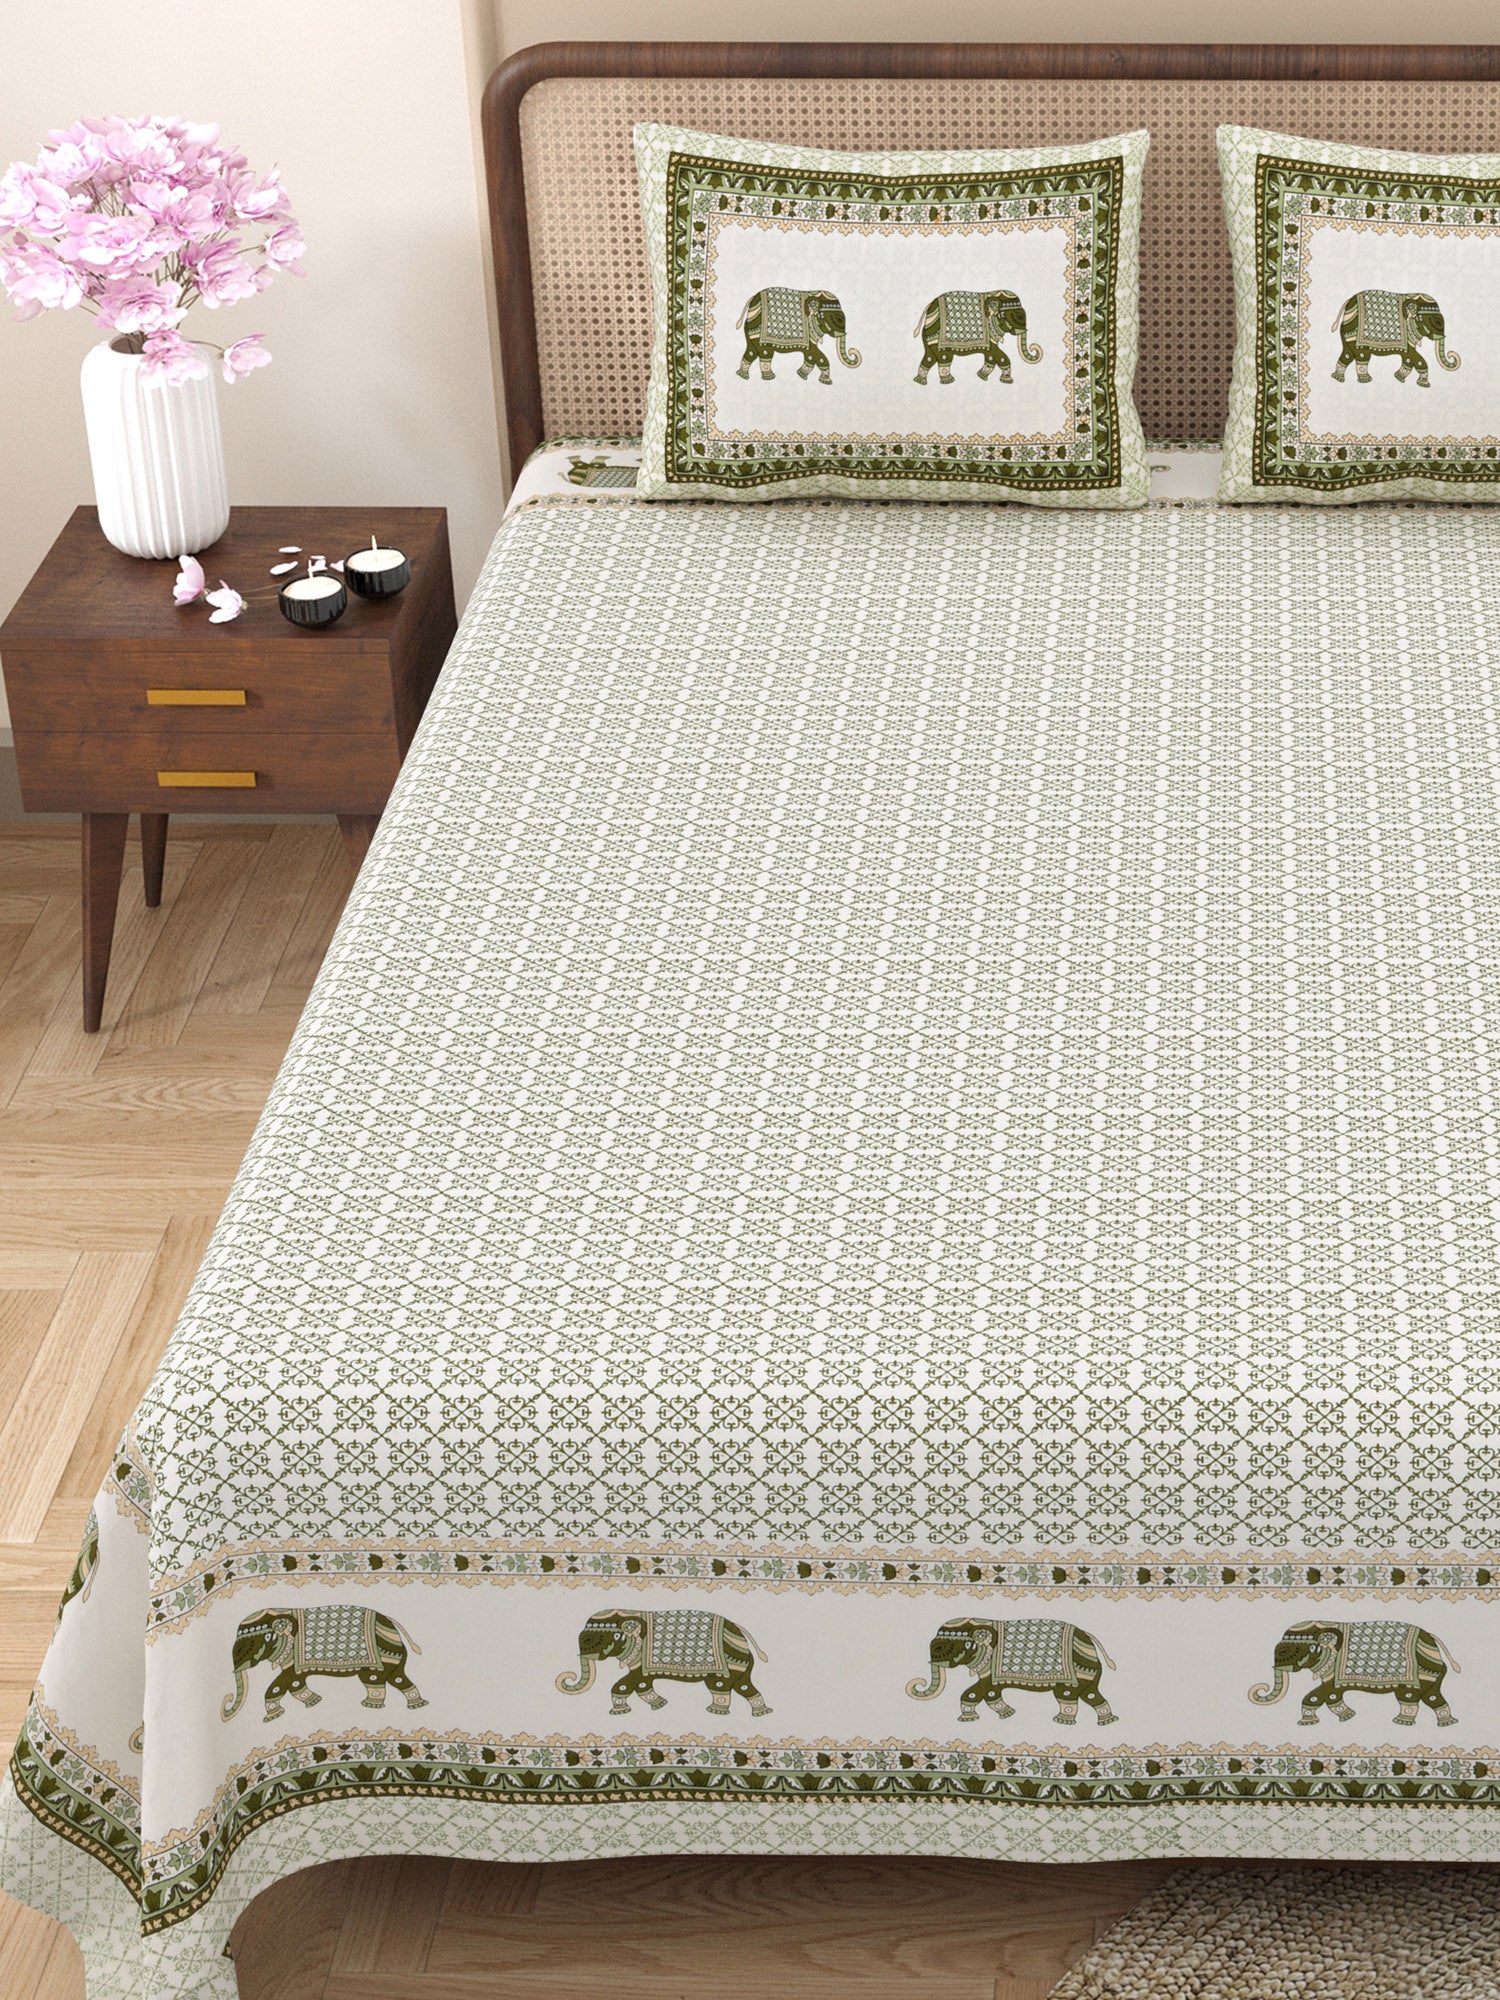 eCraftIndia Green Cotton Geometric Elephant Printed 180TC King Size Double Bedsheet with 2 Pillow Covers 2